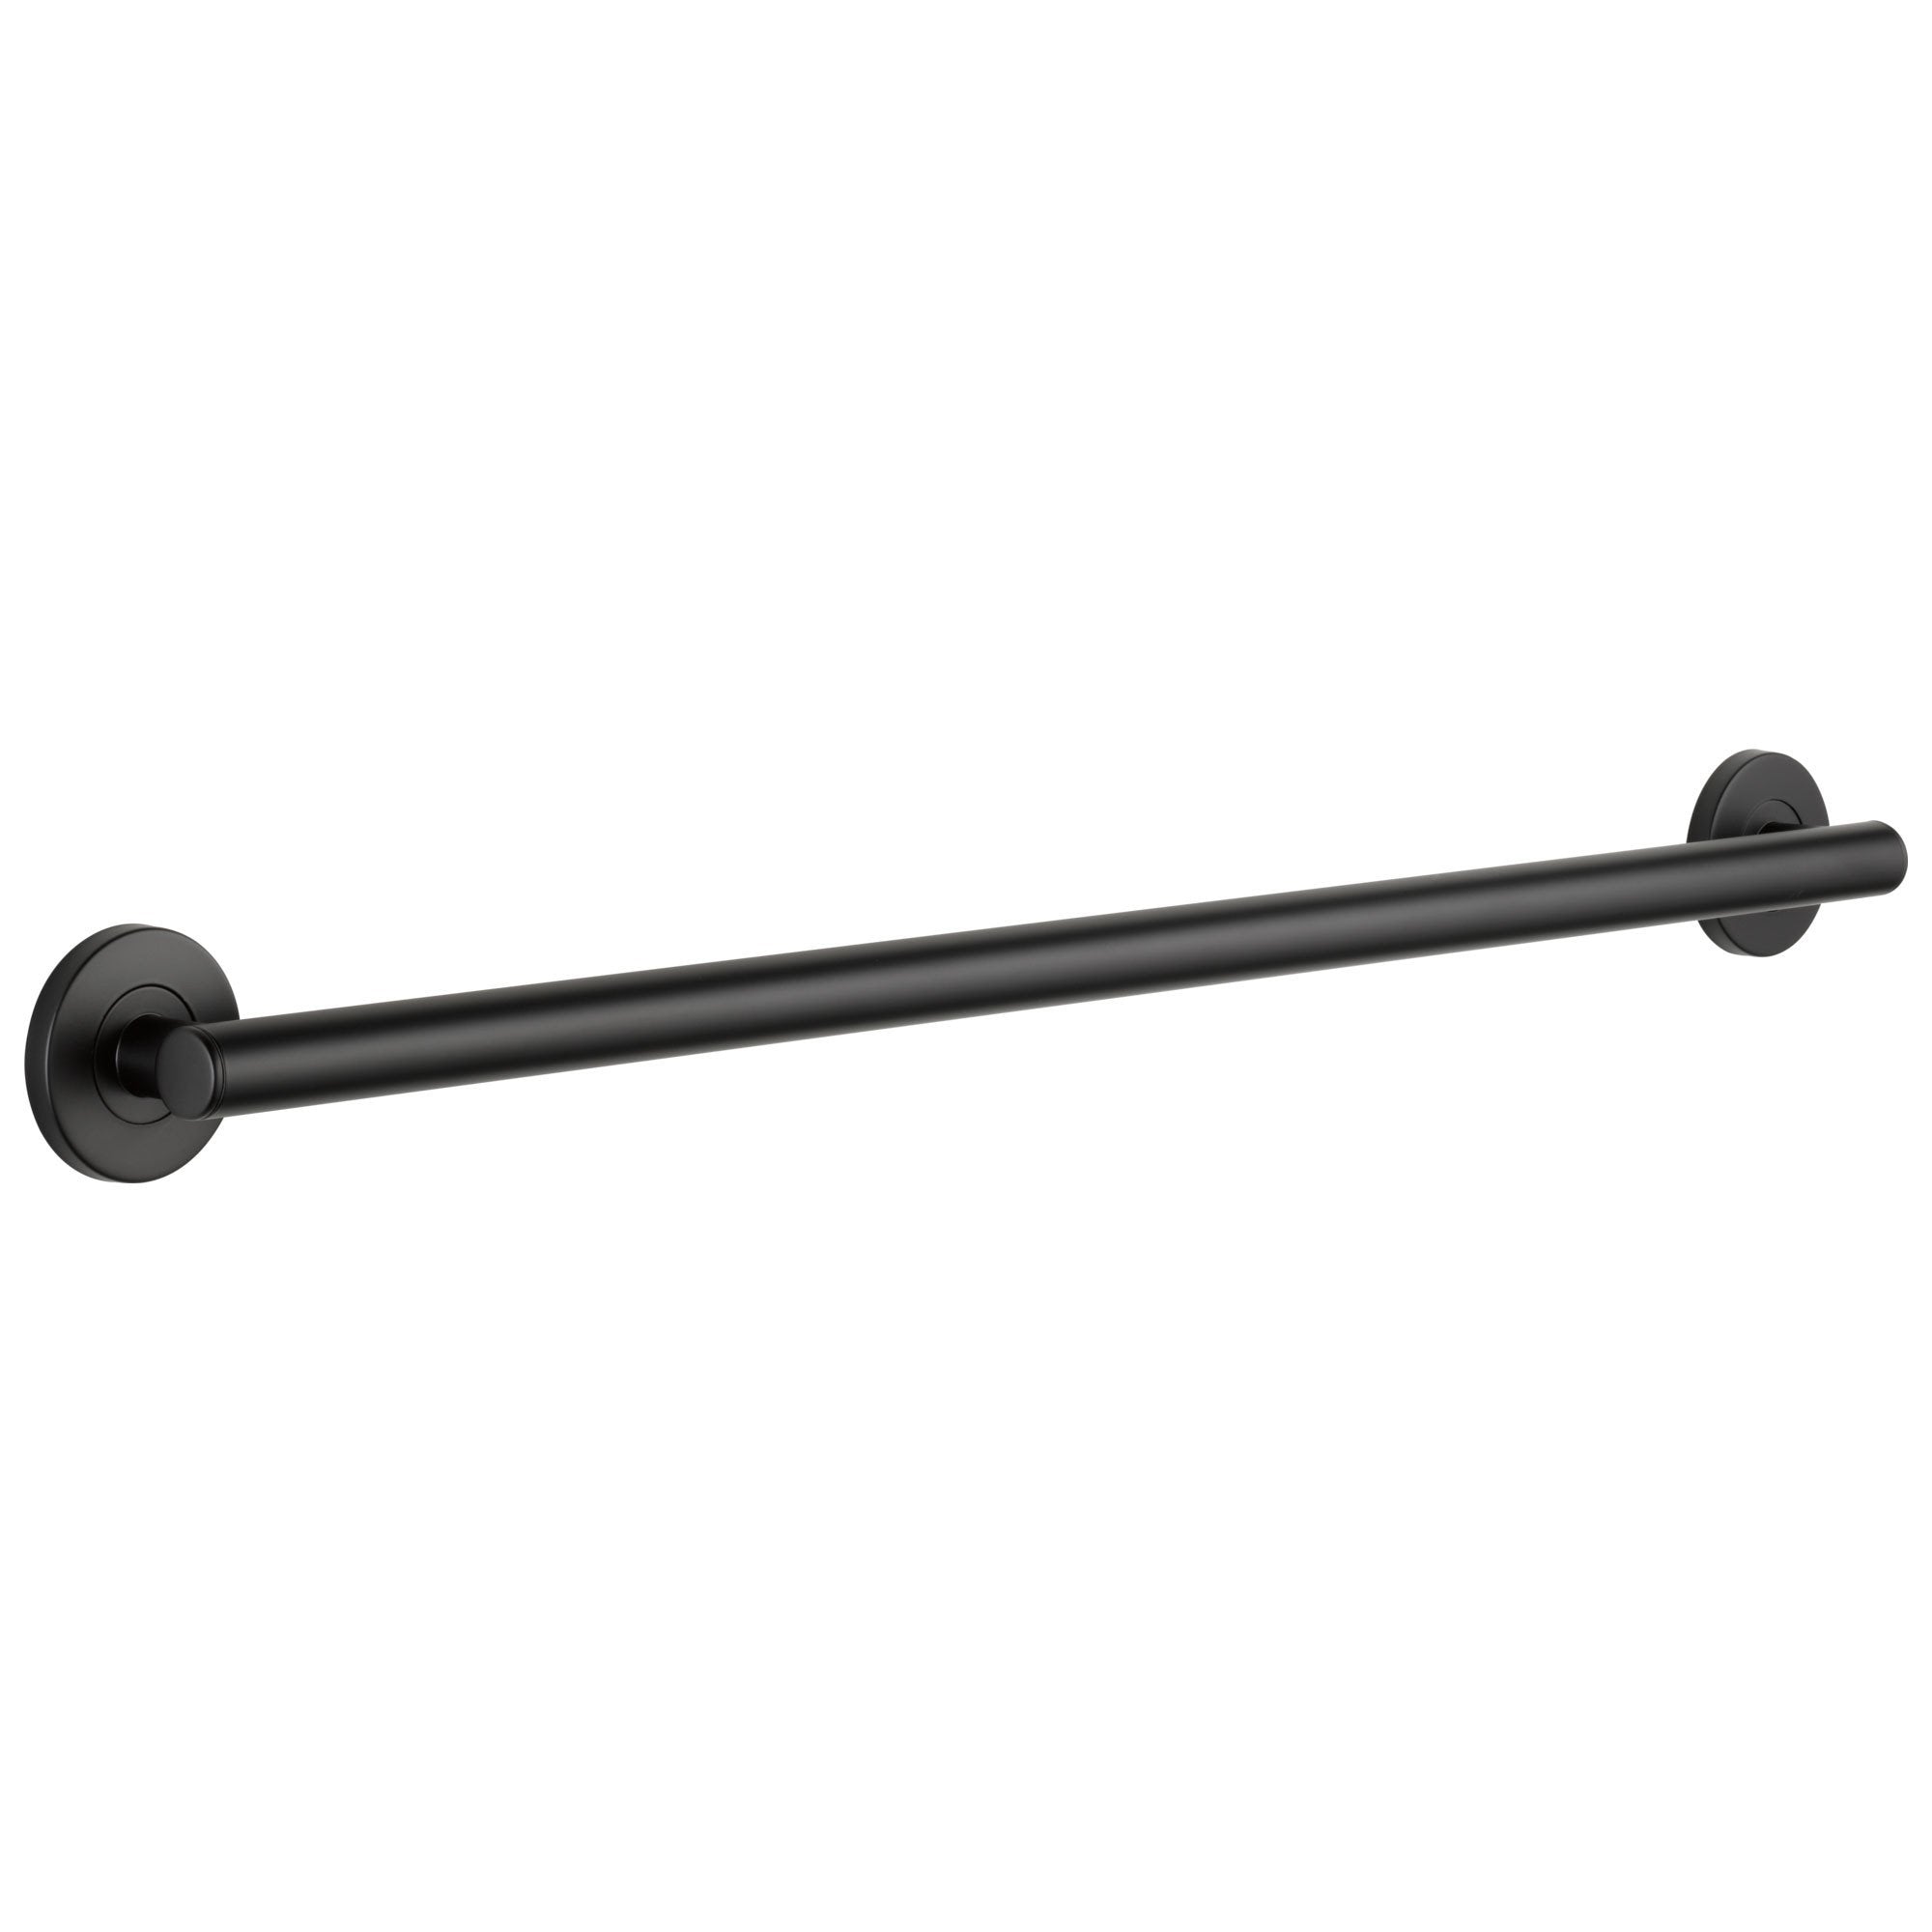 Delta Bath Safety Collection Matte Black Finish Contemporary Concealed Wall Mount ADA Approved 36" Long Decorative Bathroom Grab Bar D41836BL